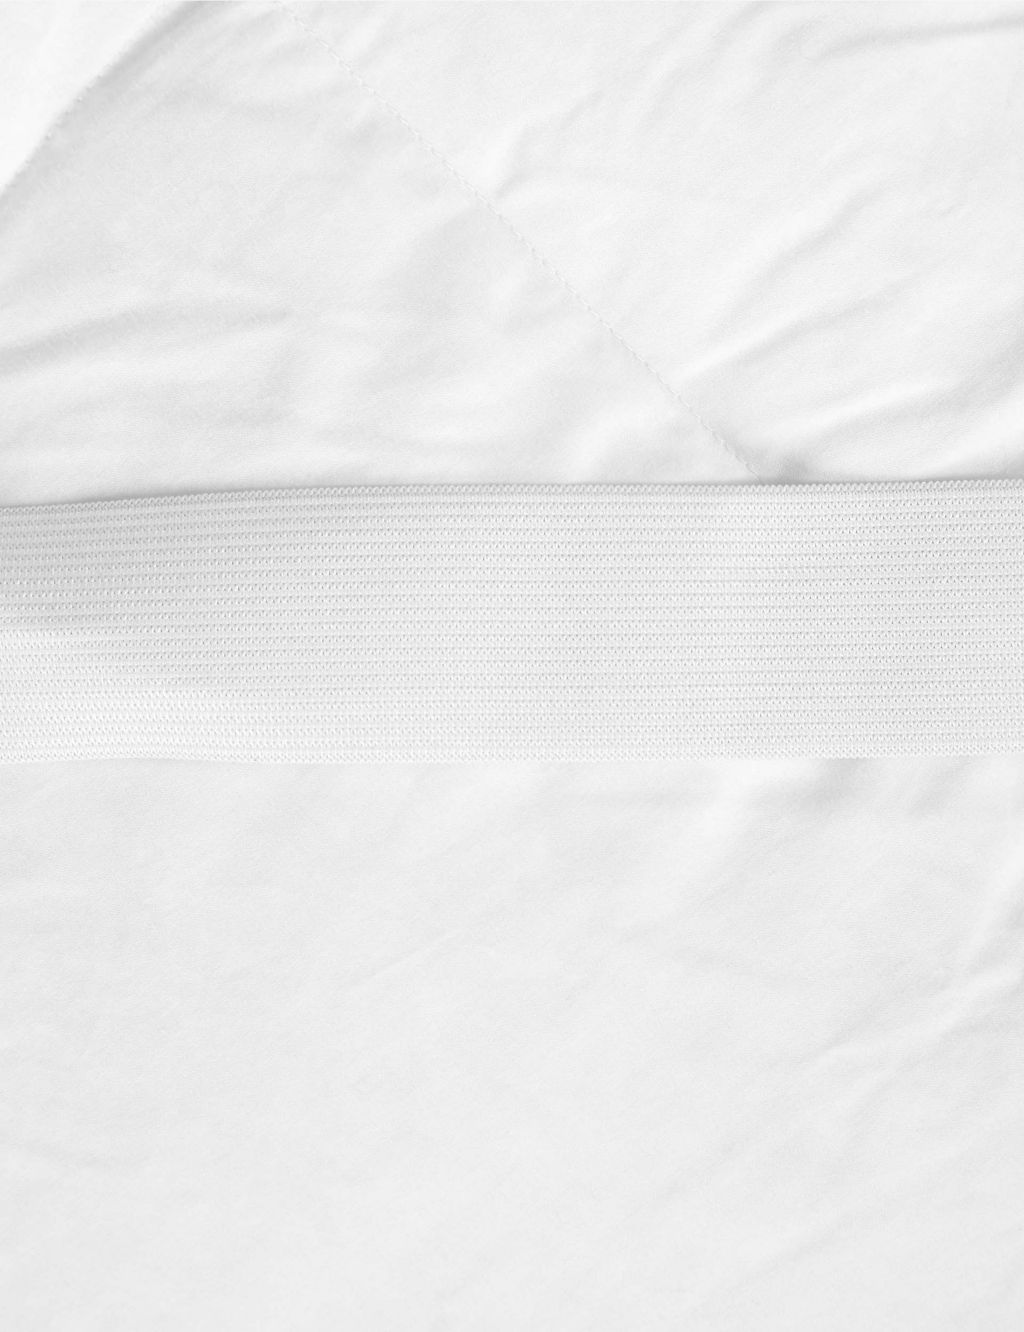 Duck Feather & Down Mattress Topper image 6